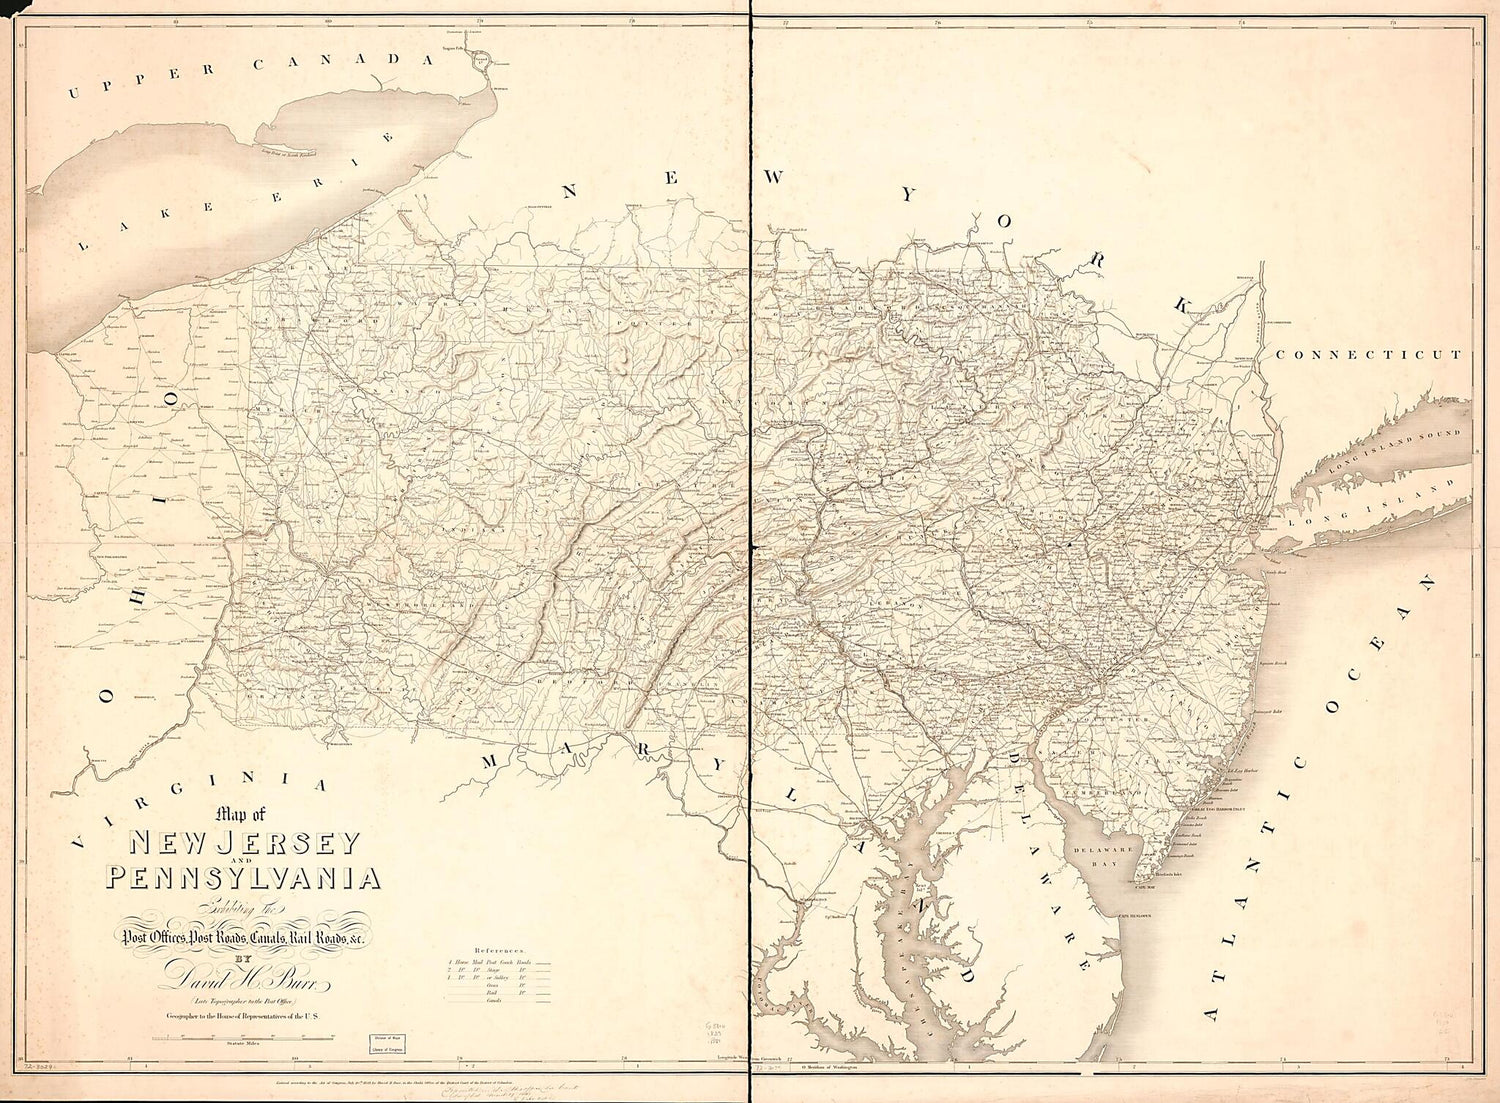 This old map of Map of New Jersey and Pennsylvania Exhibiting the Post Offices, Post Roads, Canals, Rail Roads, &amp;c from 1839 was created by David H. Burr in 1839